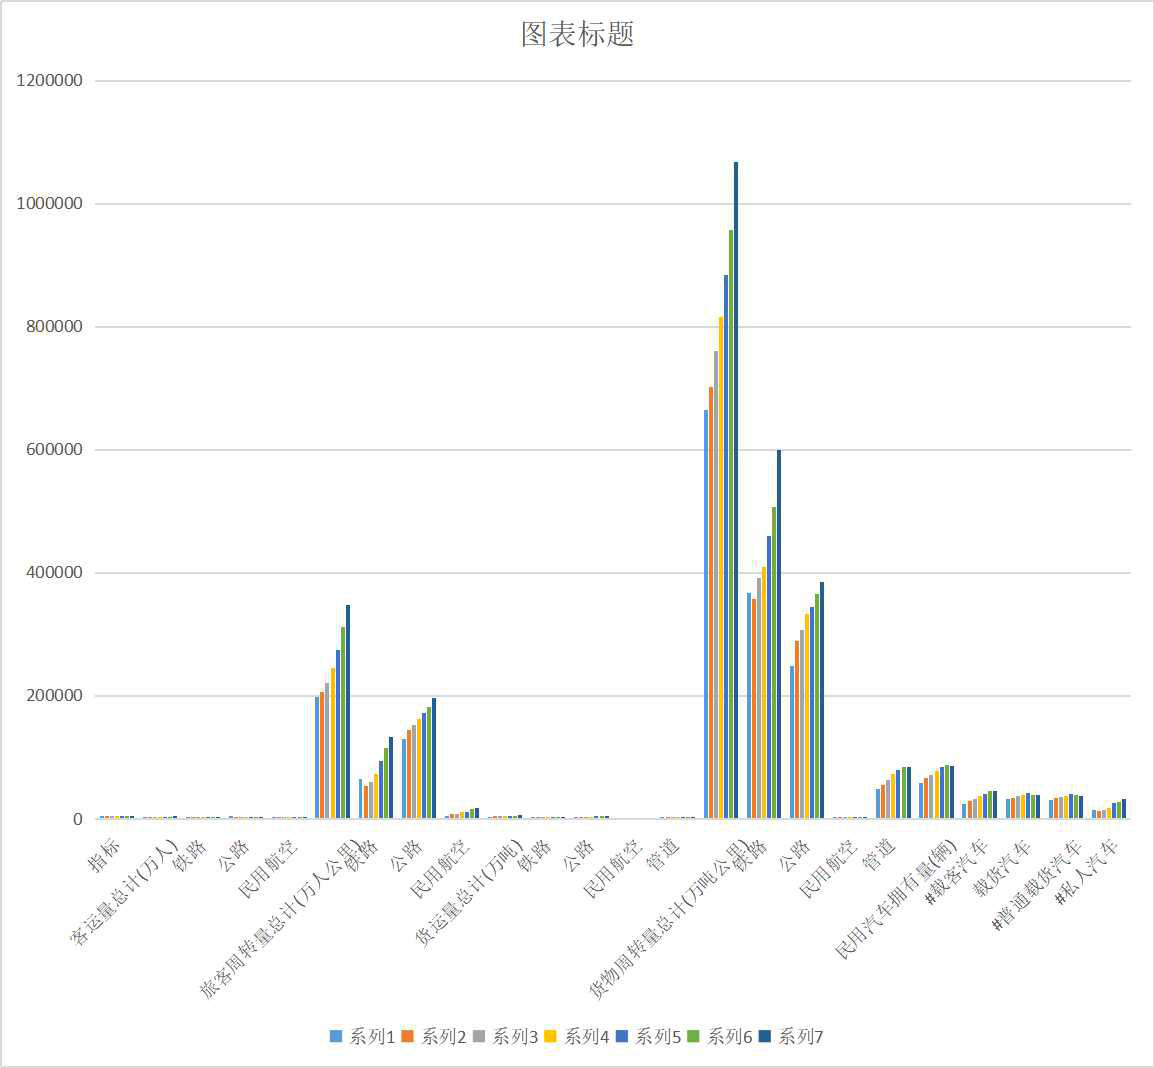 Basic situation of transportation industry in Qinghai Province (1995-2020)